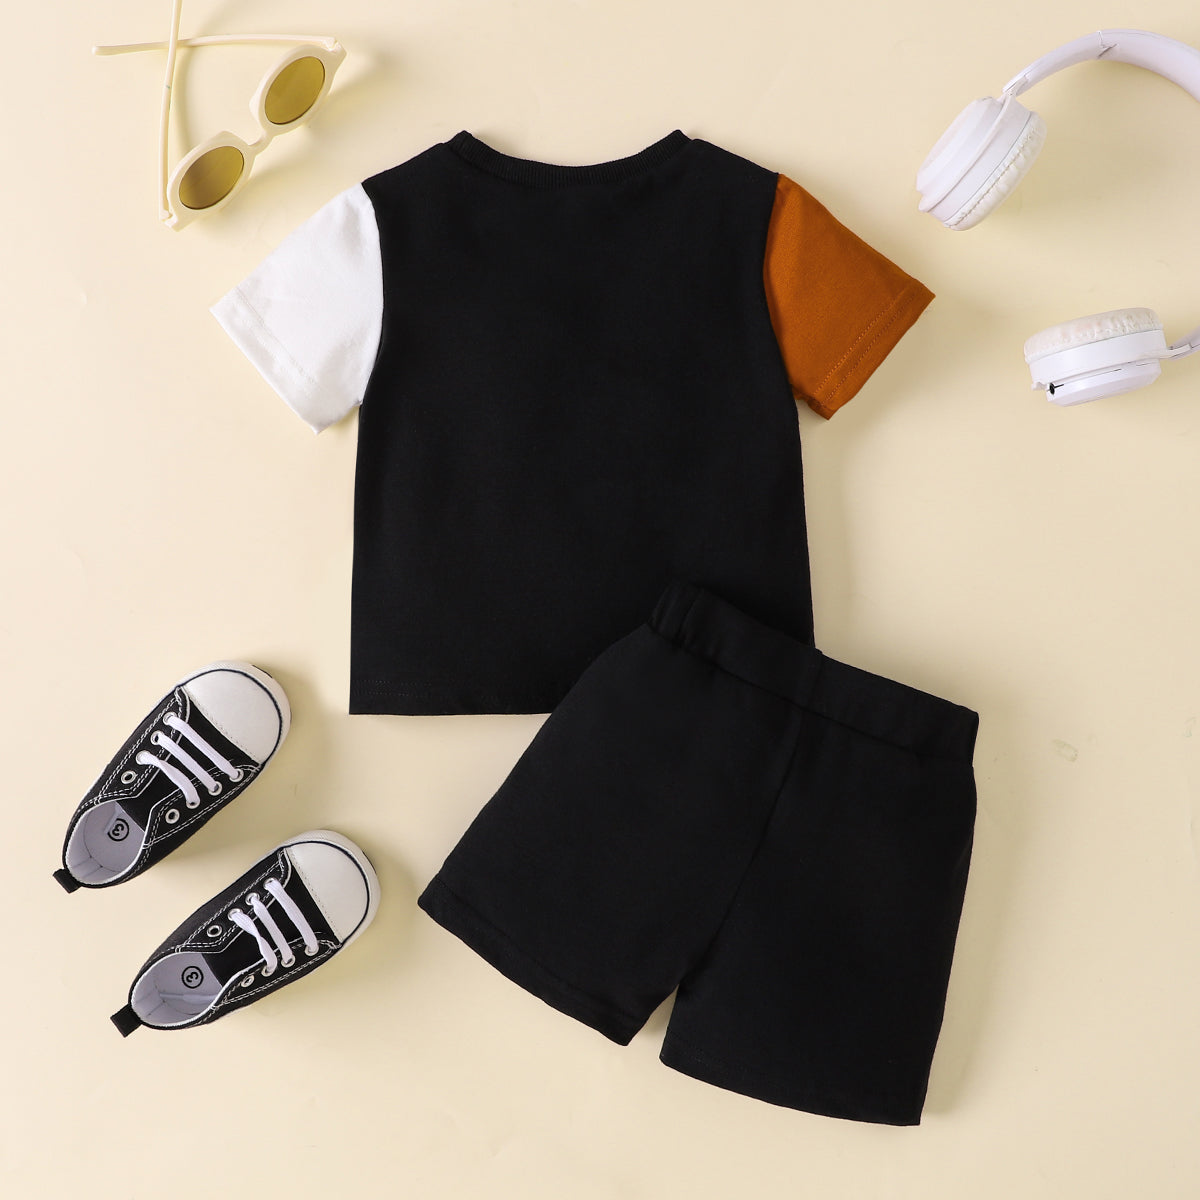 Uylee's Boutique NICE Color Block Tee and Shorts Set